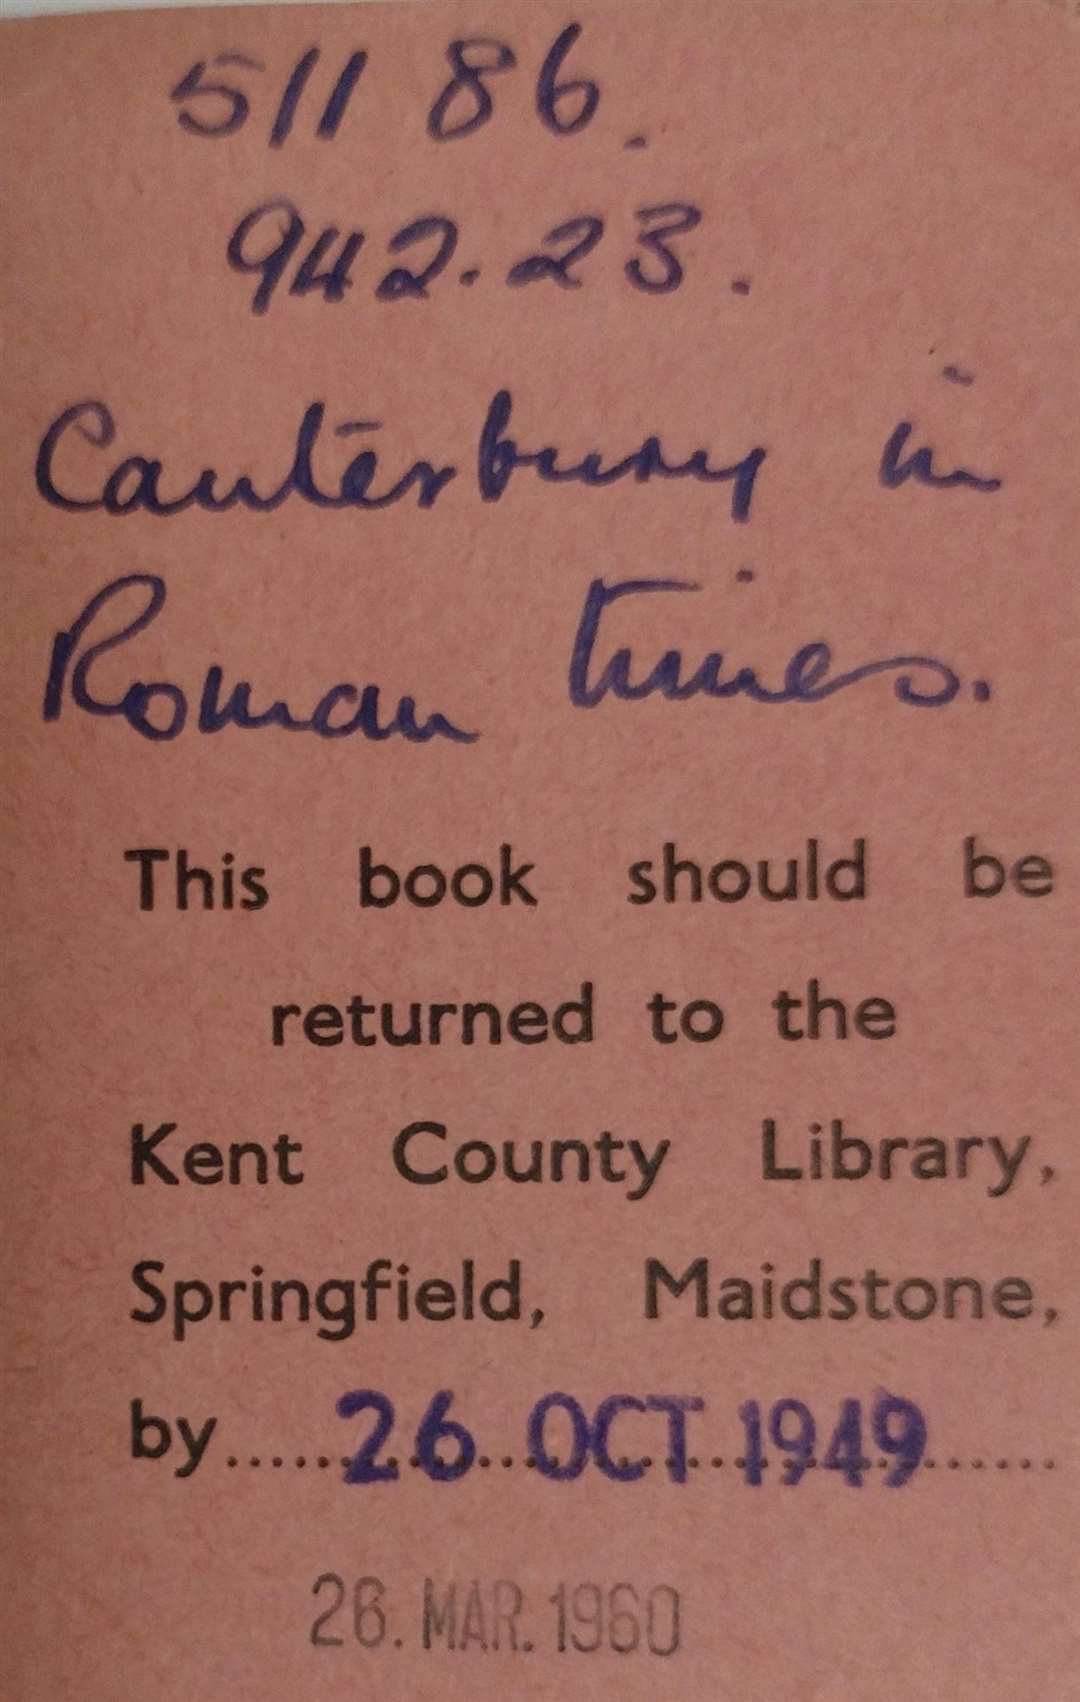 A library ticket recording that "Canterbury in Roman Times" was due to be returned on October 26, 1948